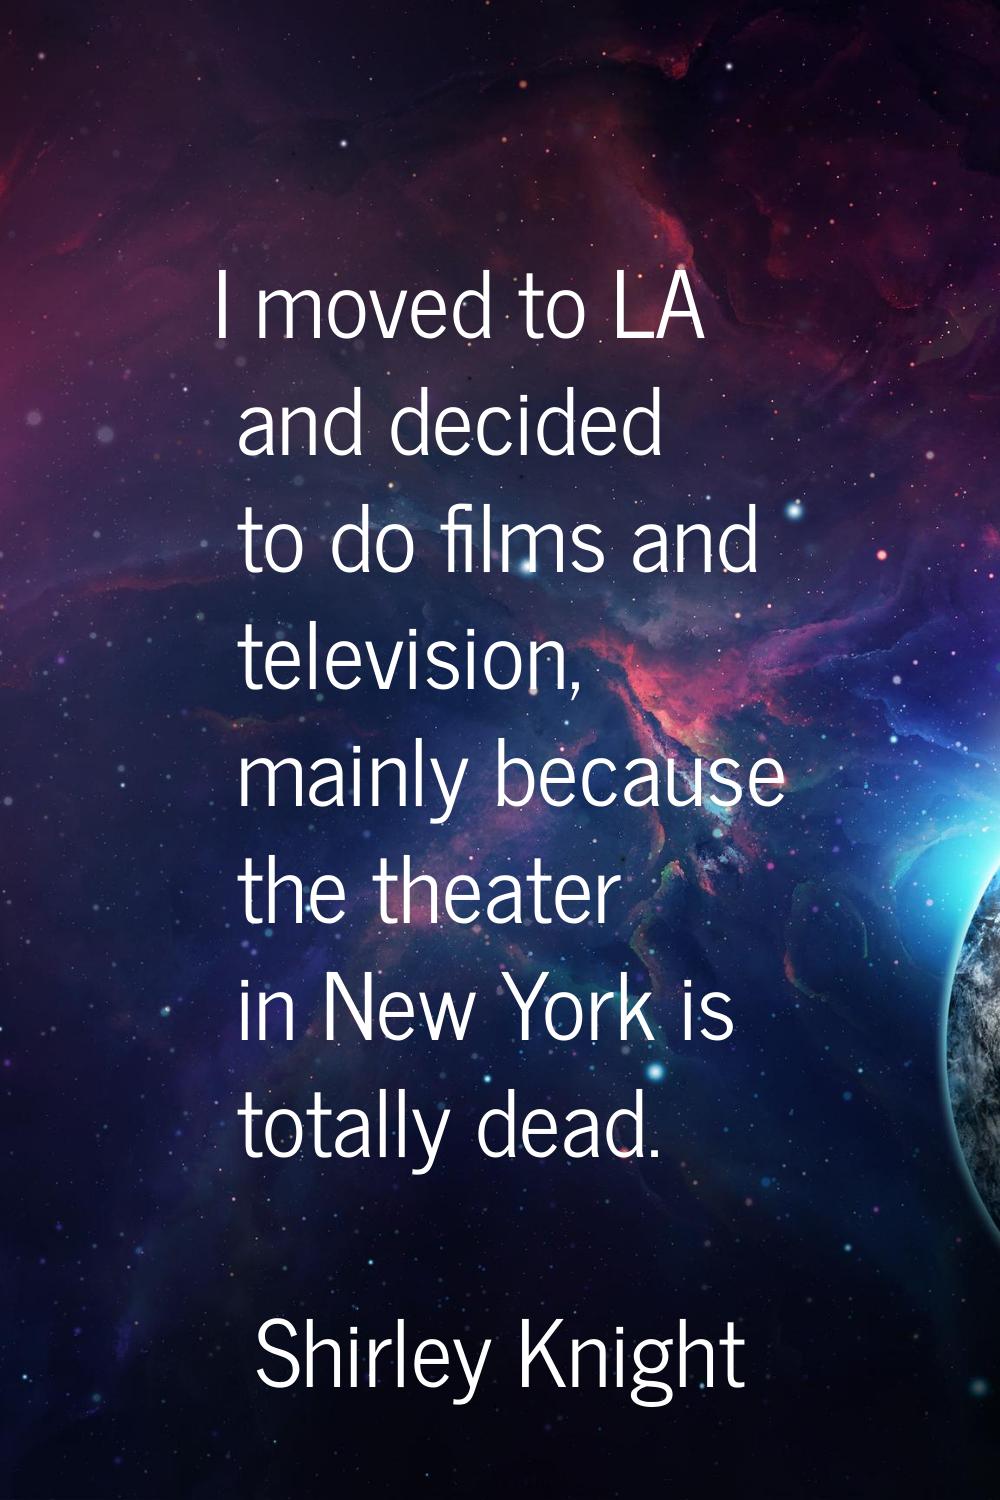 I moved to LA and decided to do films and television, mainly because the theater in New York is tot